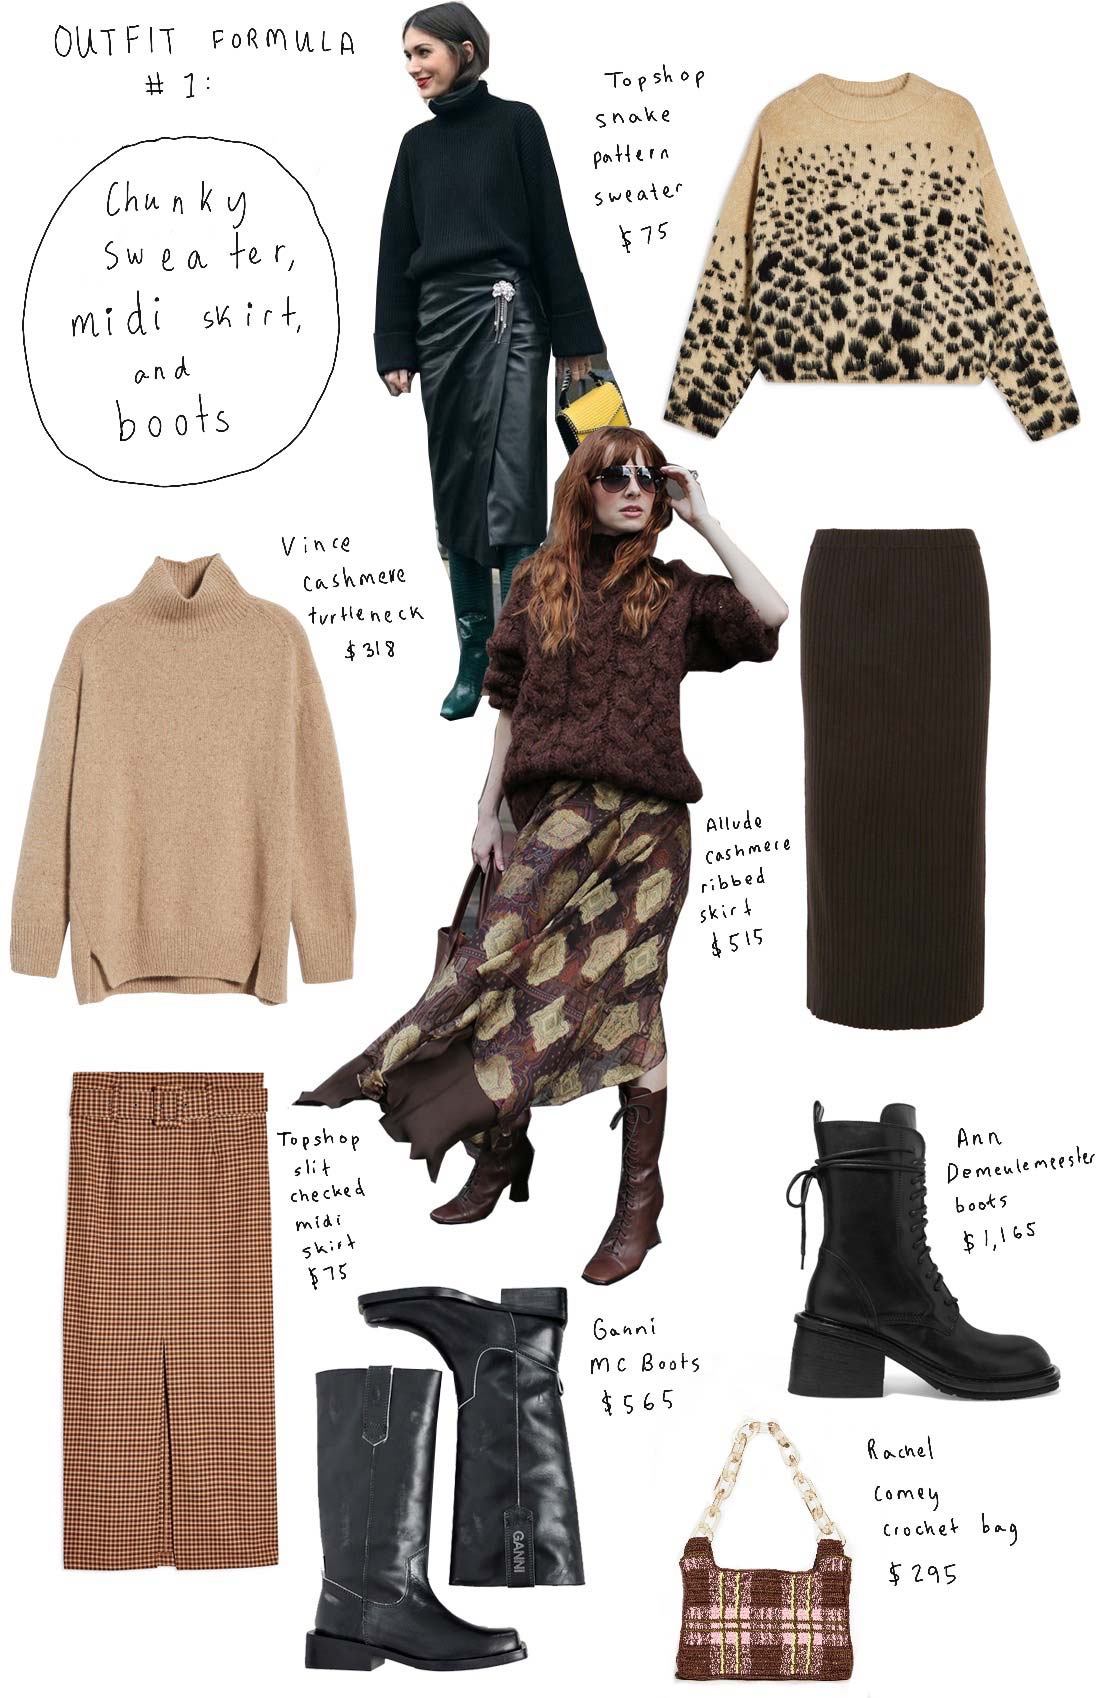 4 Fall Outfit Formulas, Sea of Shoes